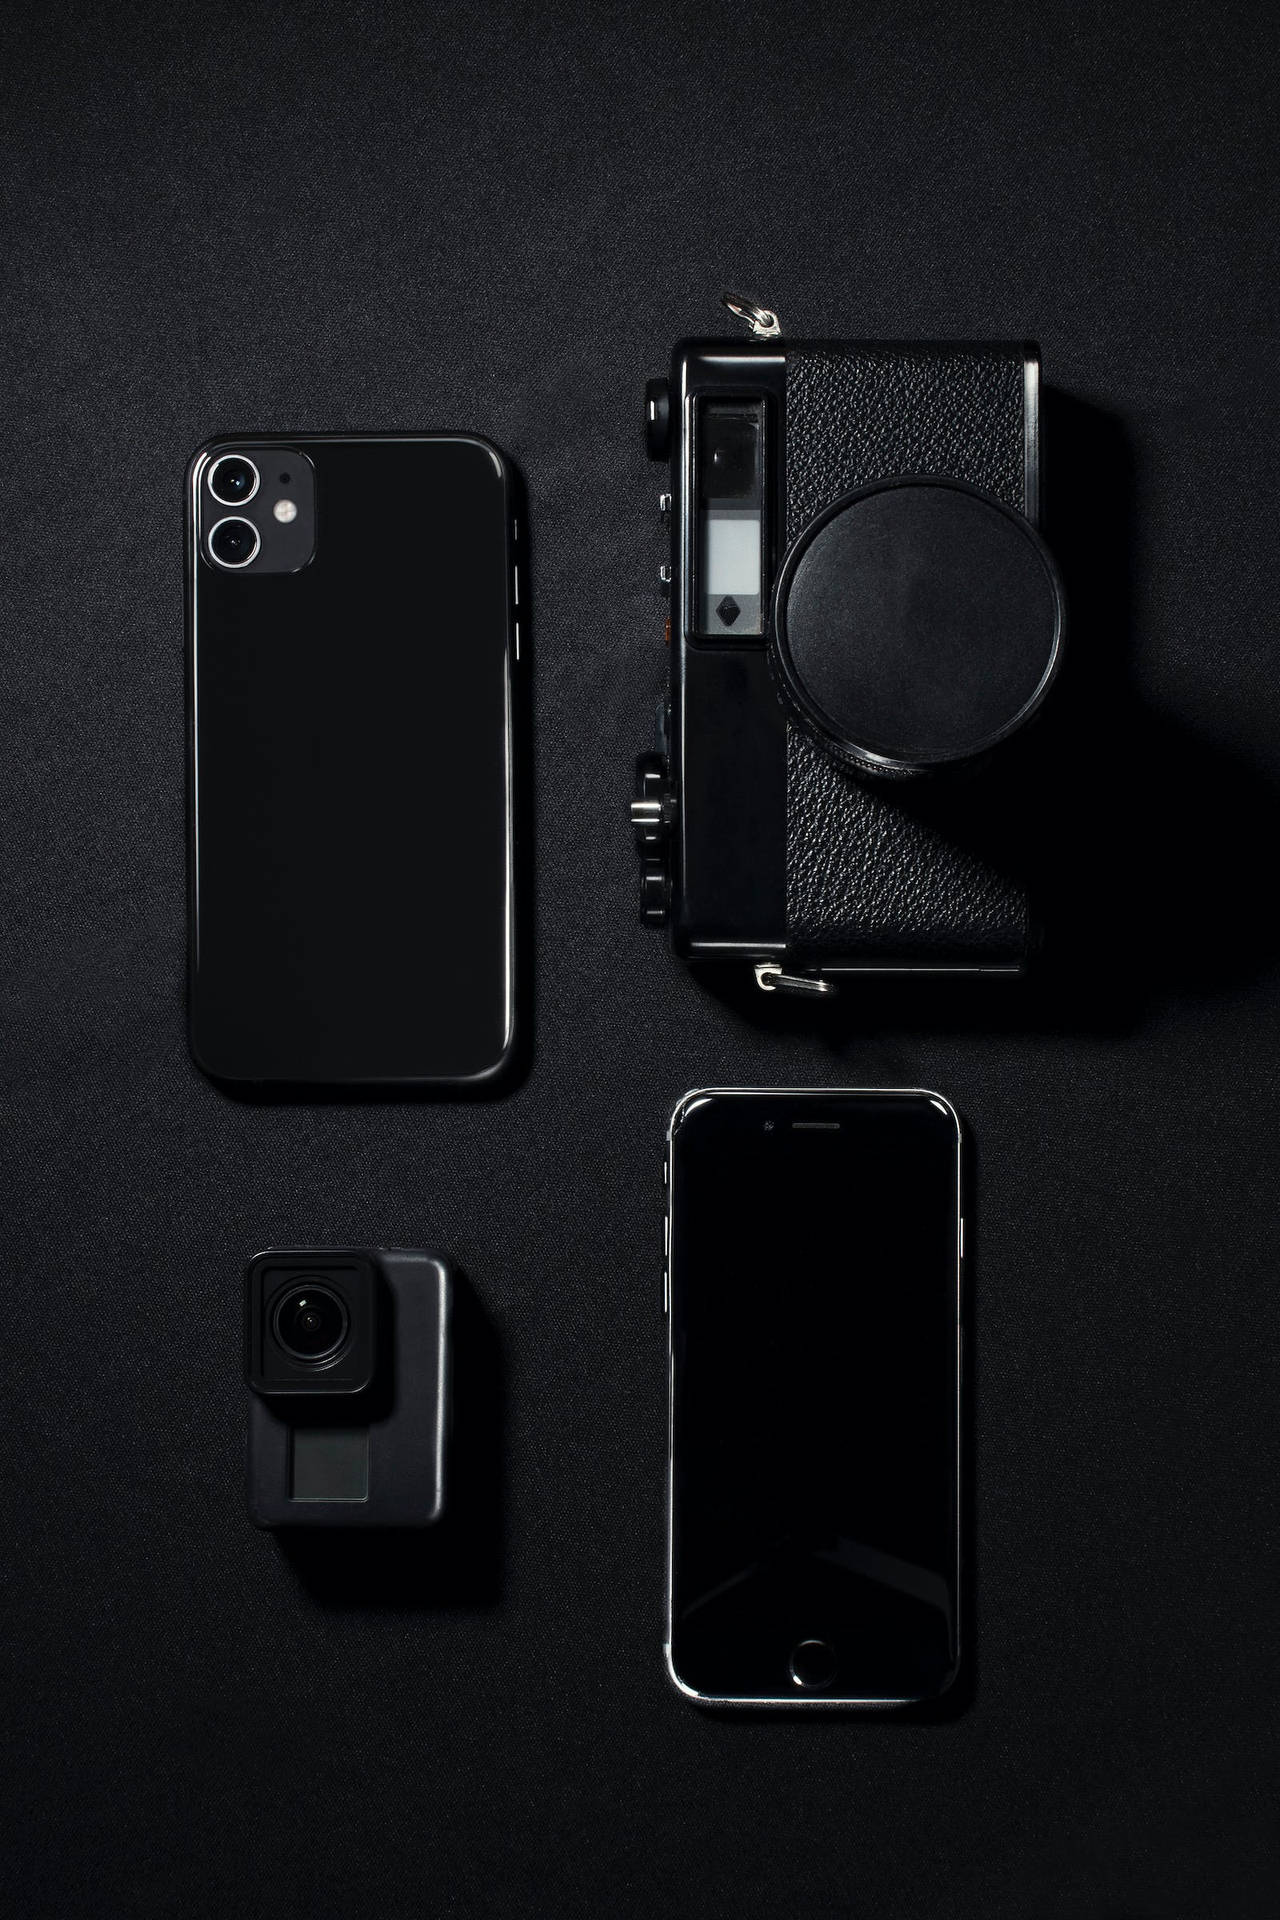 Black Aesthetic Iphone Gadgets Collection